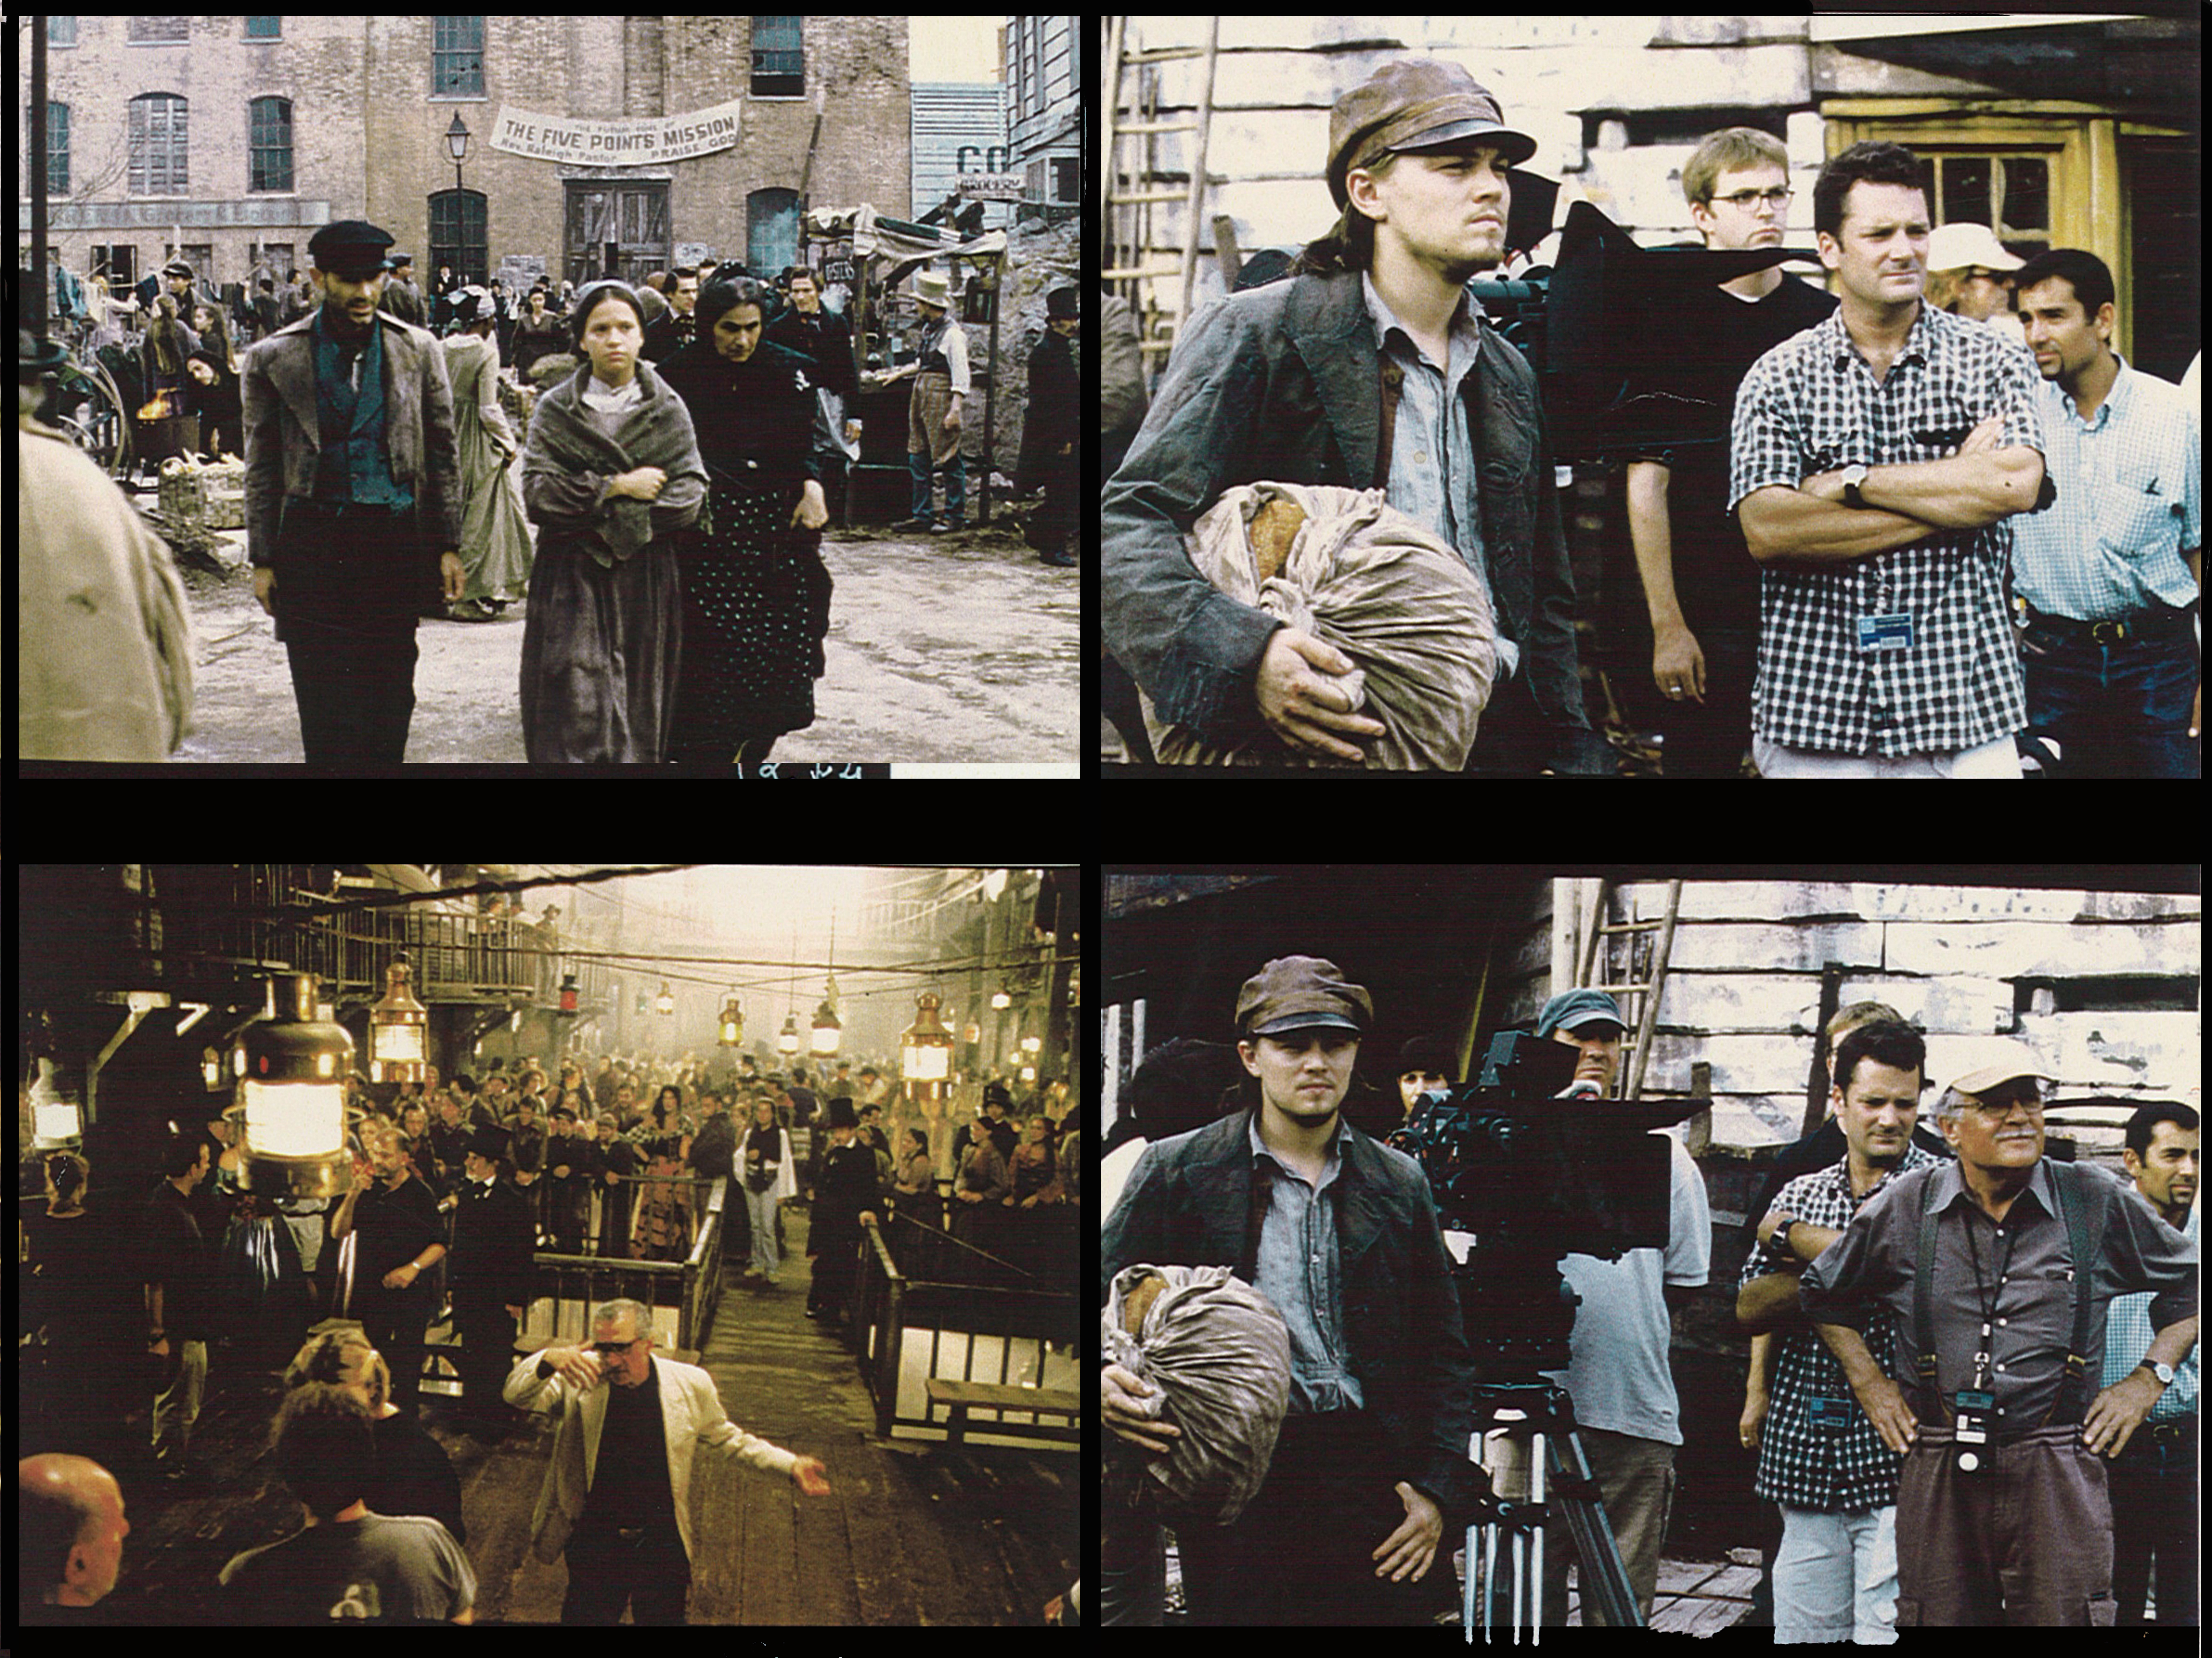 Gangs of New York - Directed by Martin Scorsese - Backstage Photos - ©2002 - Miramax Films